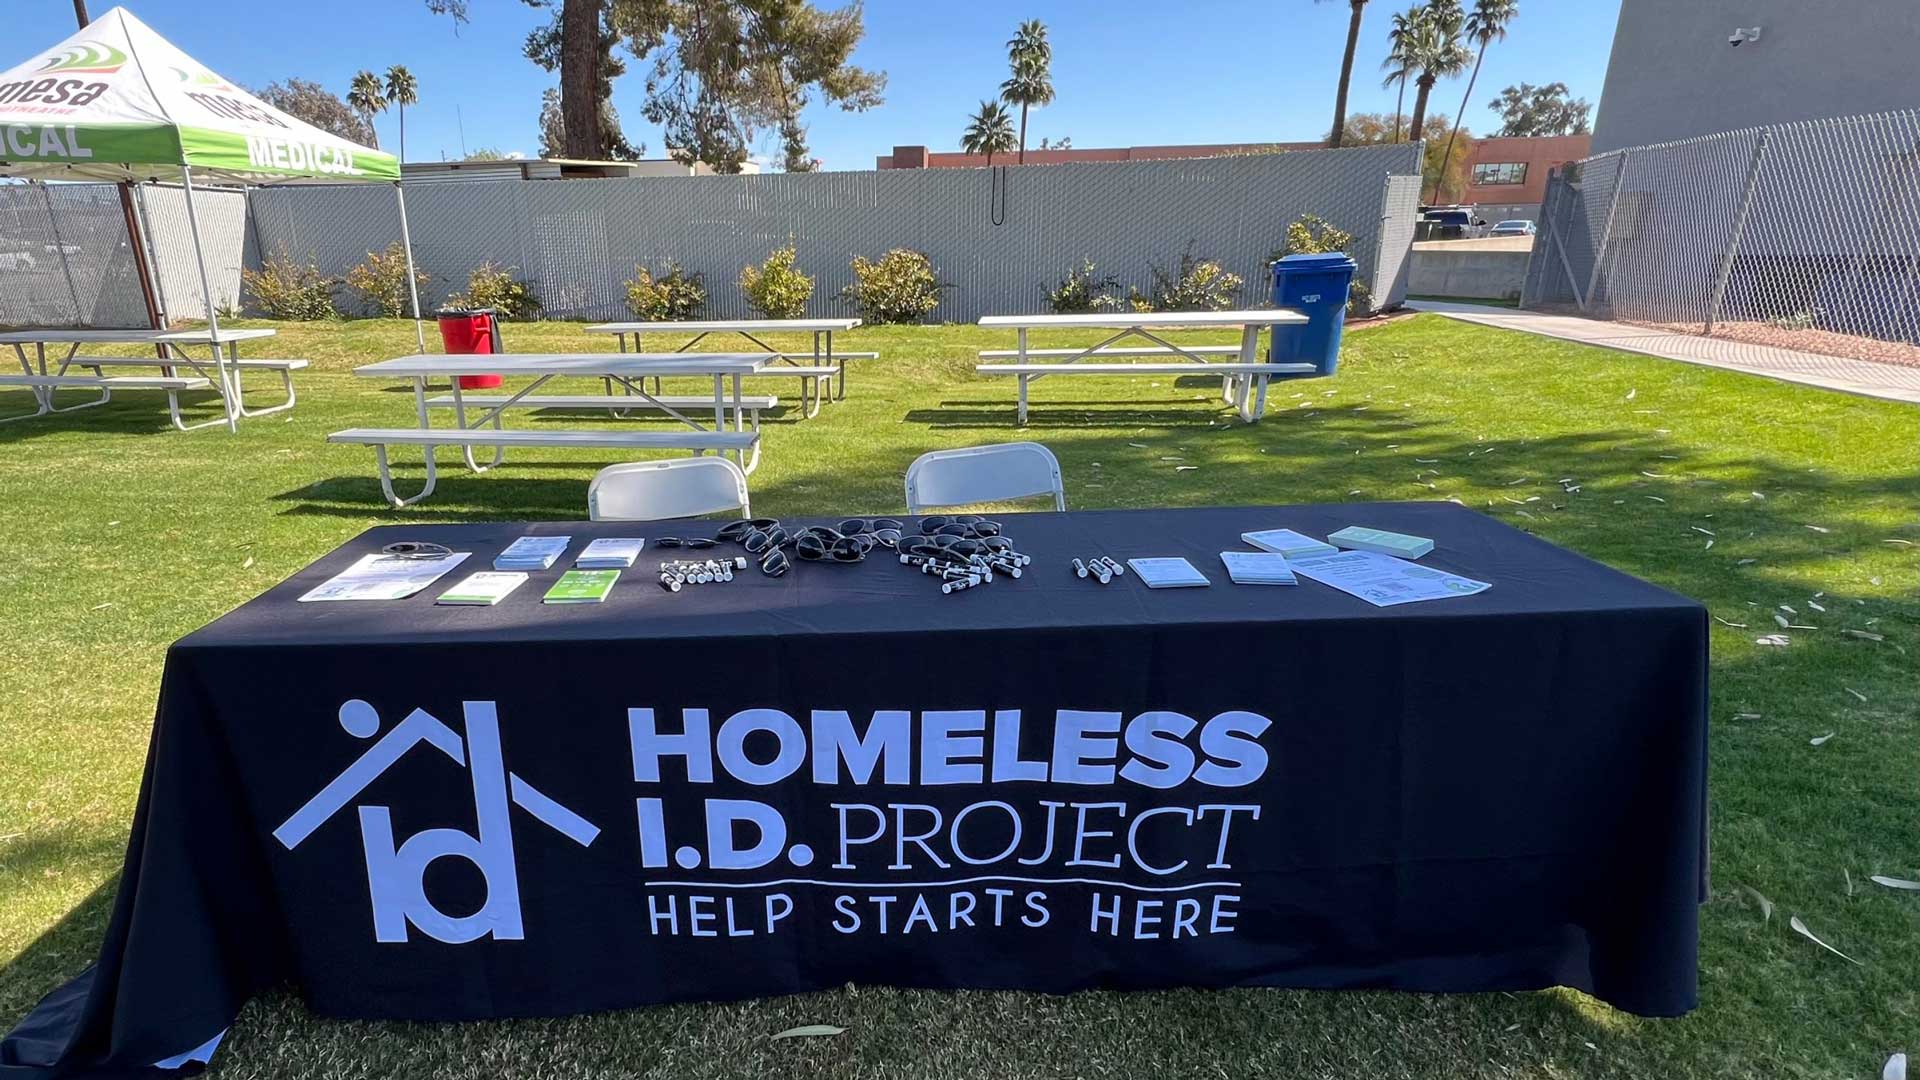 The Homeless ID Project aims to end homelessness by providing ID replacement services to eliminate barriers many unhoused individuals face to accessing housing, jobs, and essential services. 